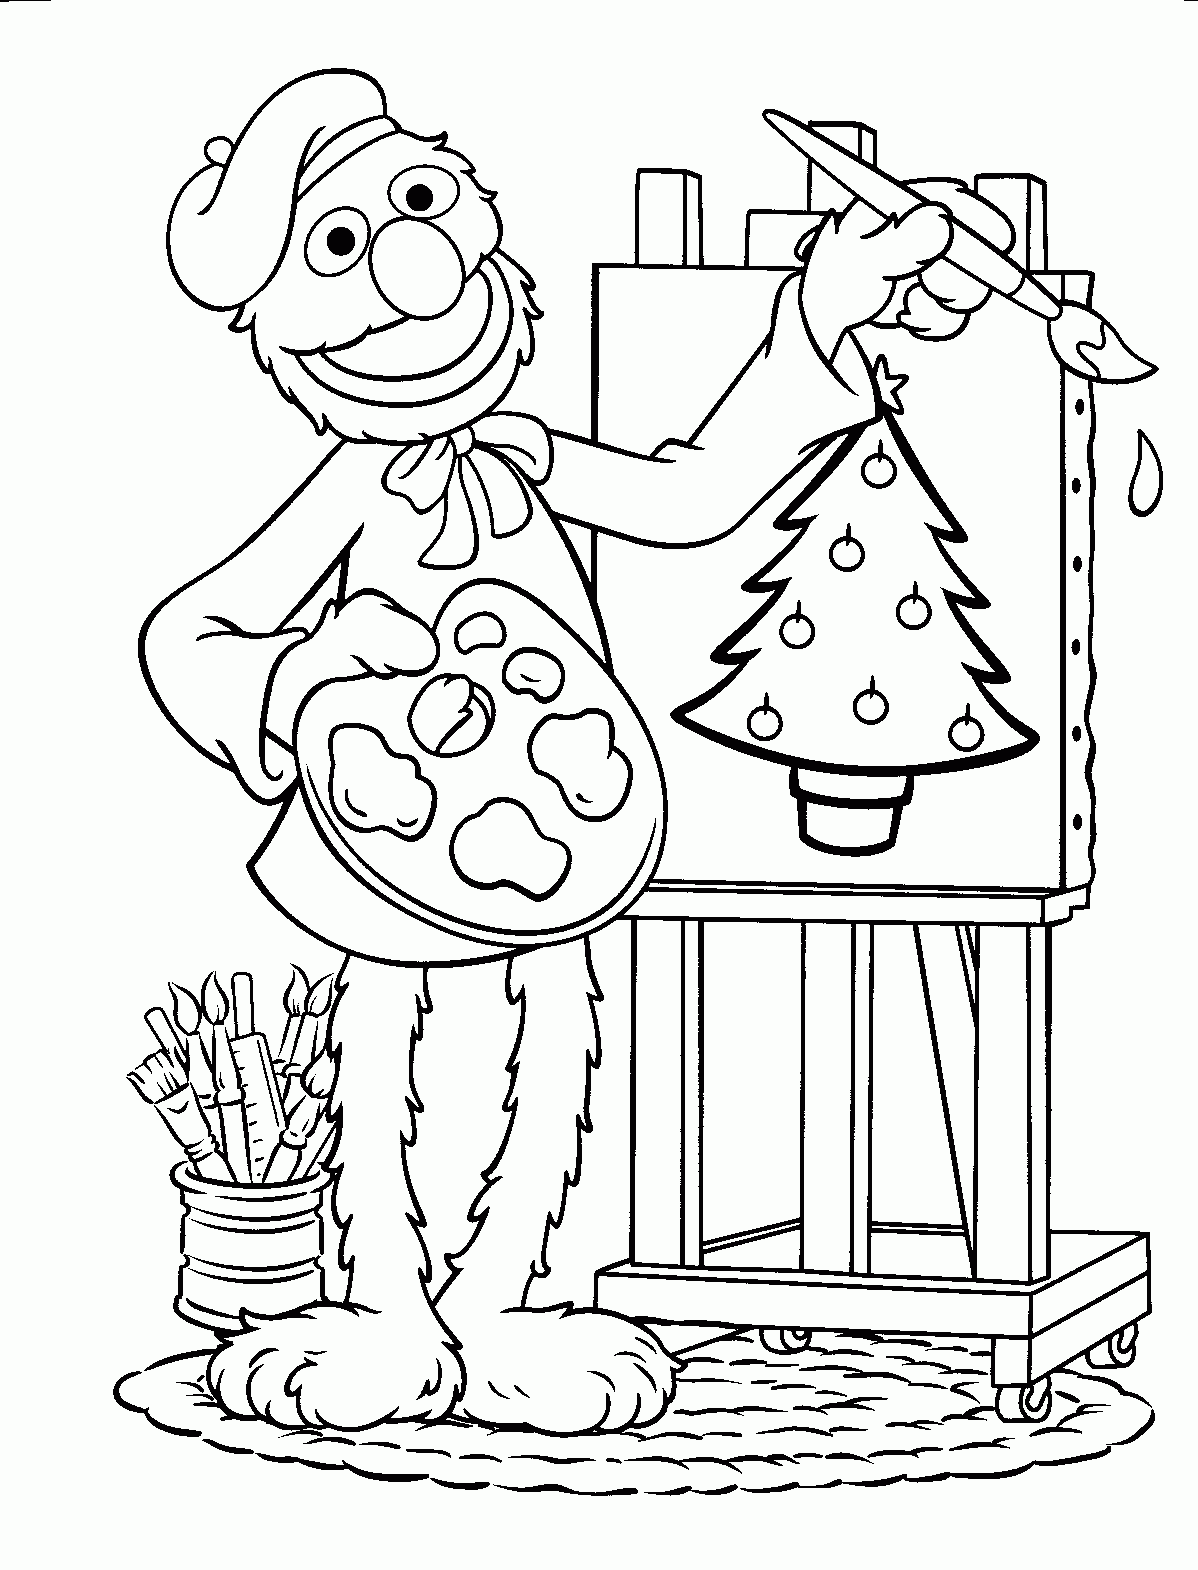 Free Sesame Street Christmas Coloring Pages, Download Free Sesame